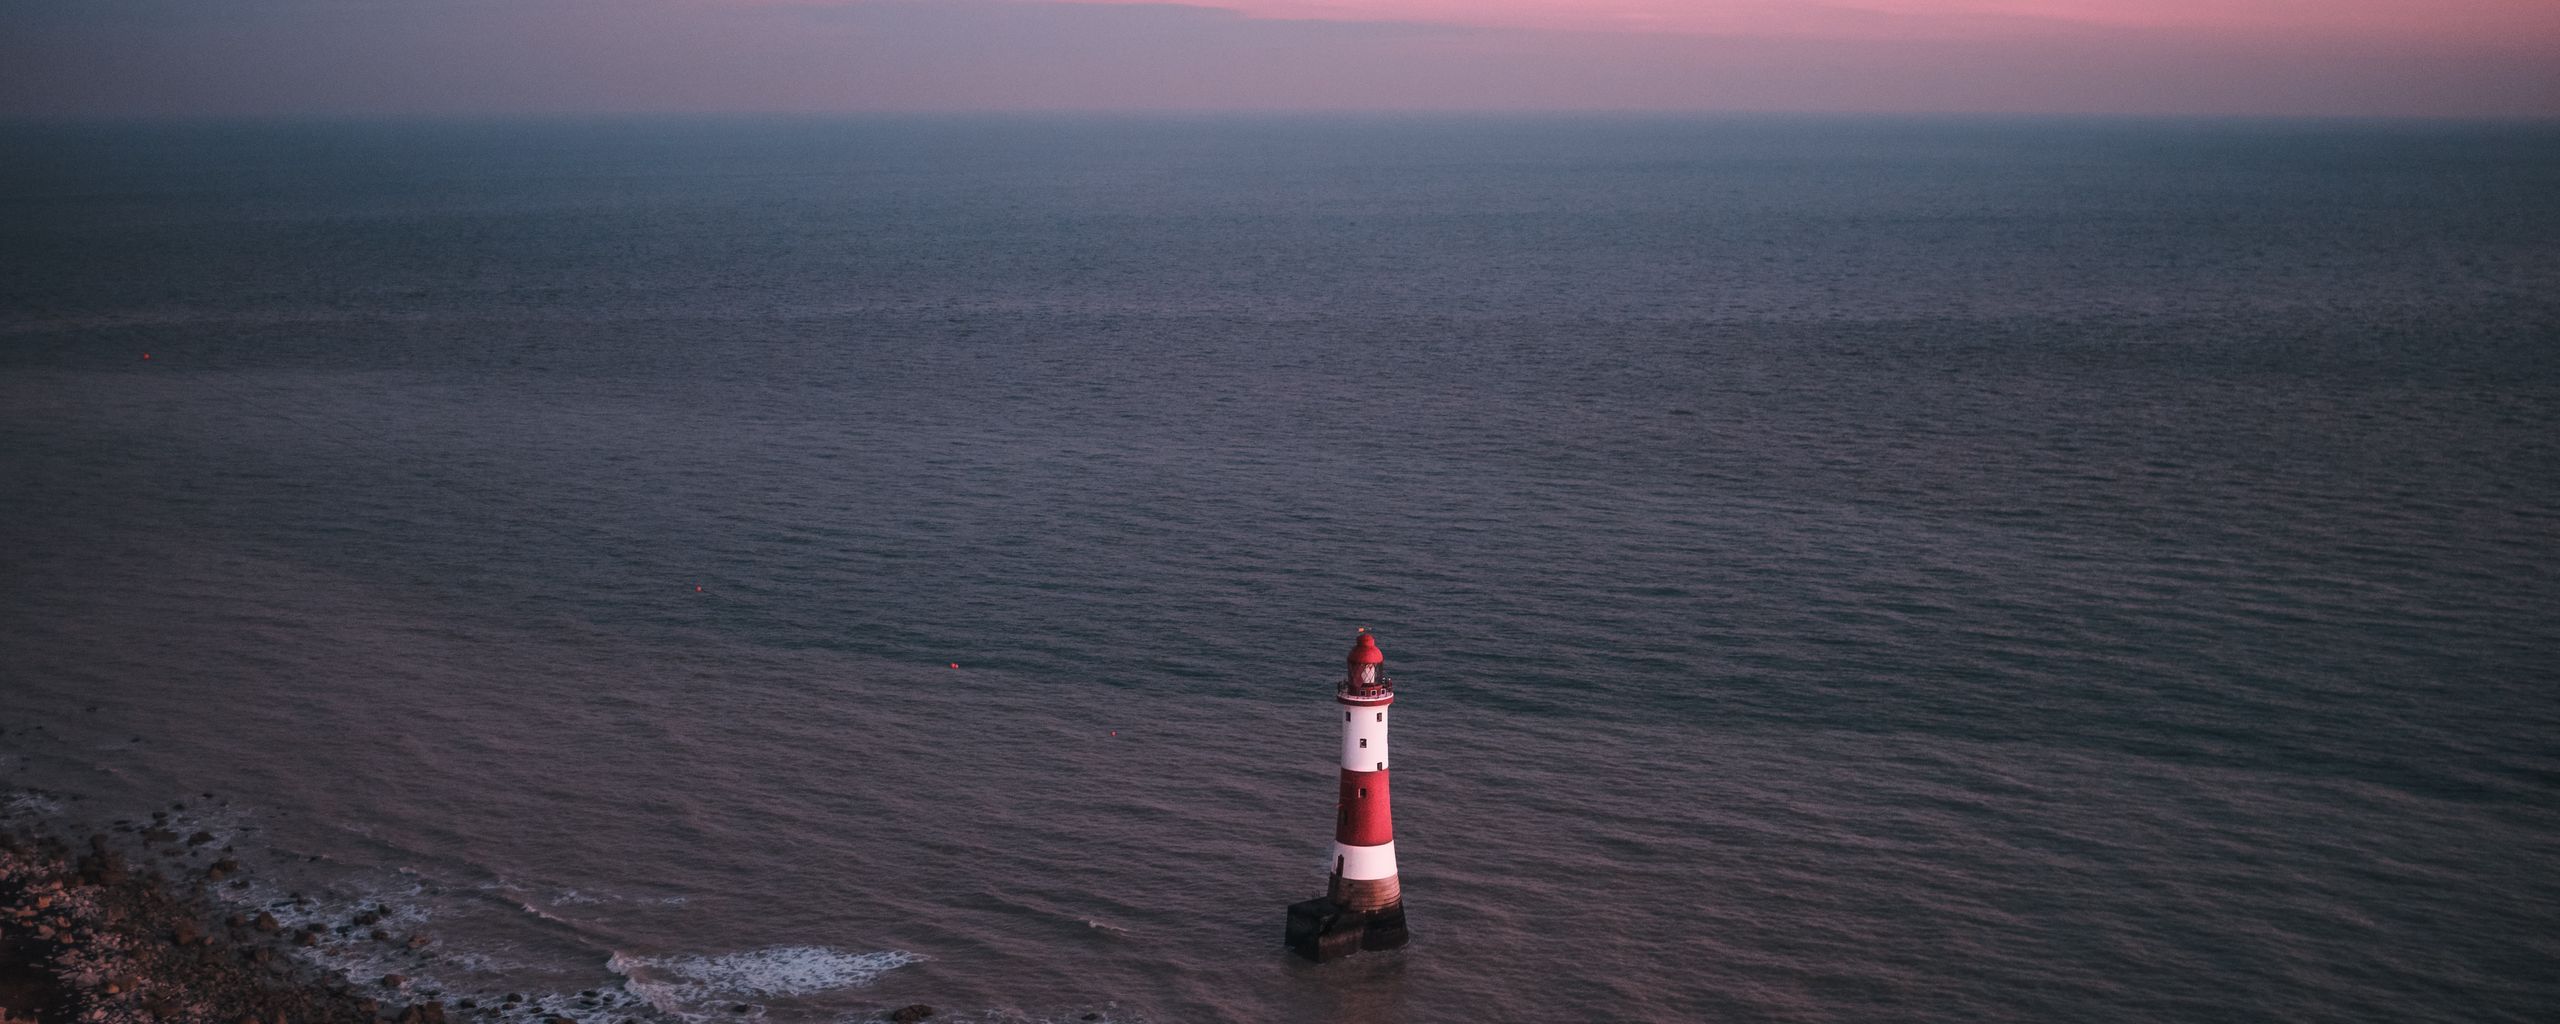 Download wallpaper 2560x1024 lighthouse, sea, aerial view, coast